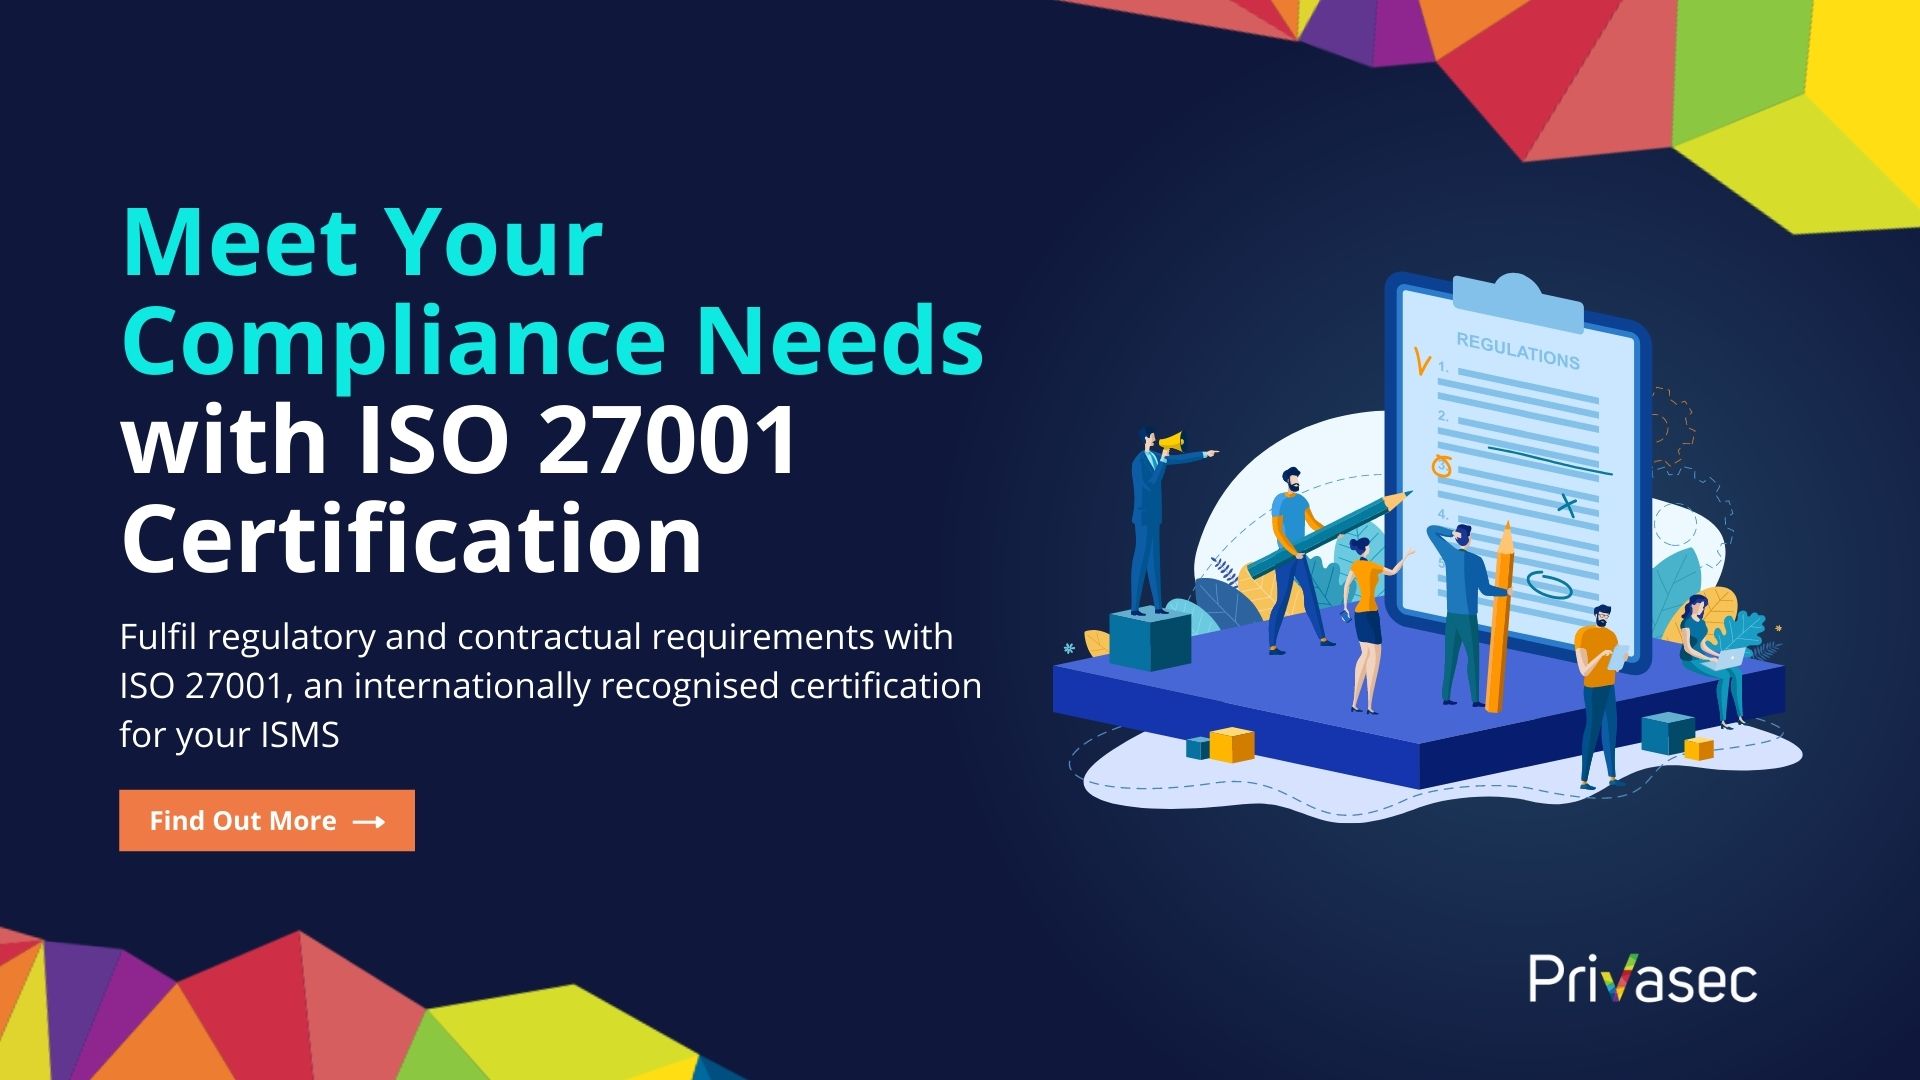 Meet Your Compliance Needs With ISO 27001 Certification